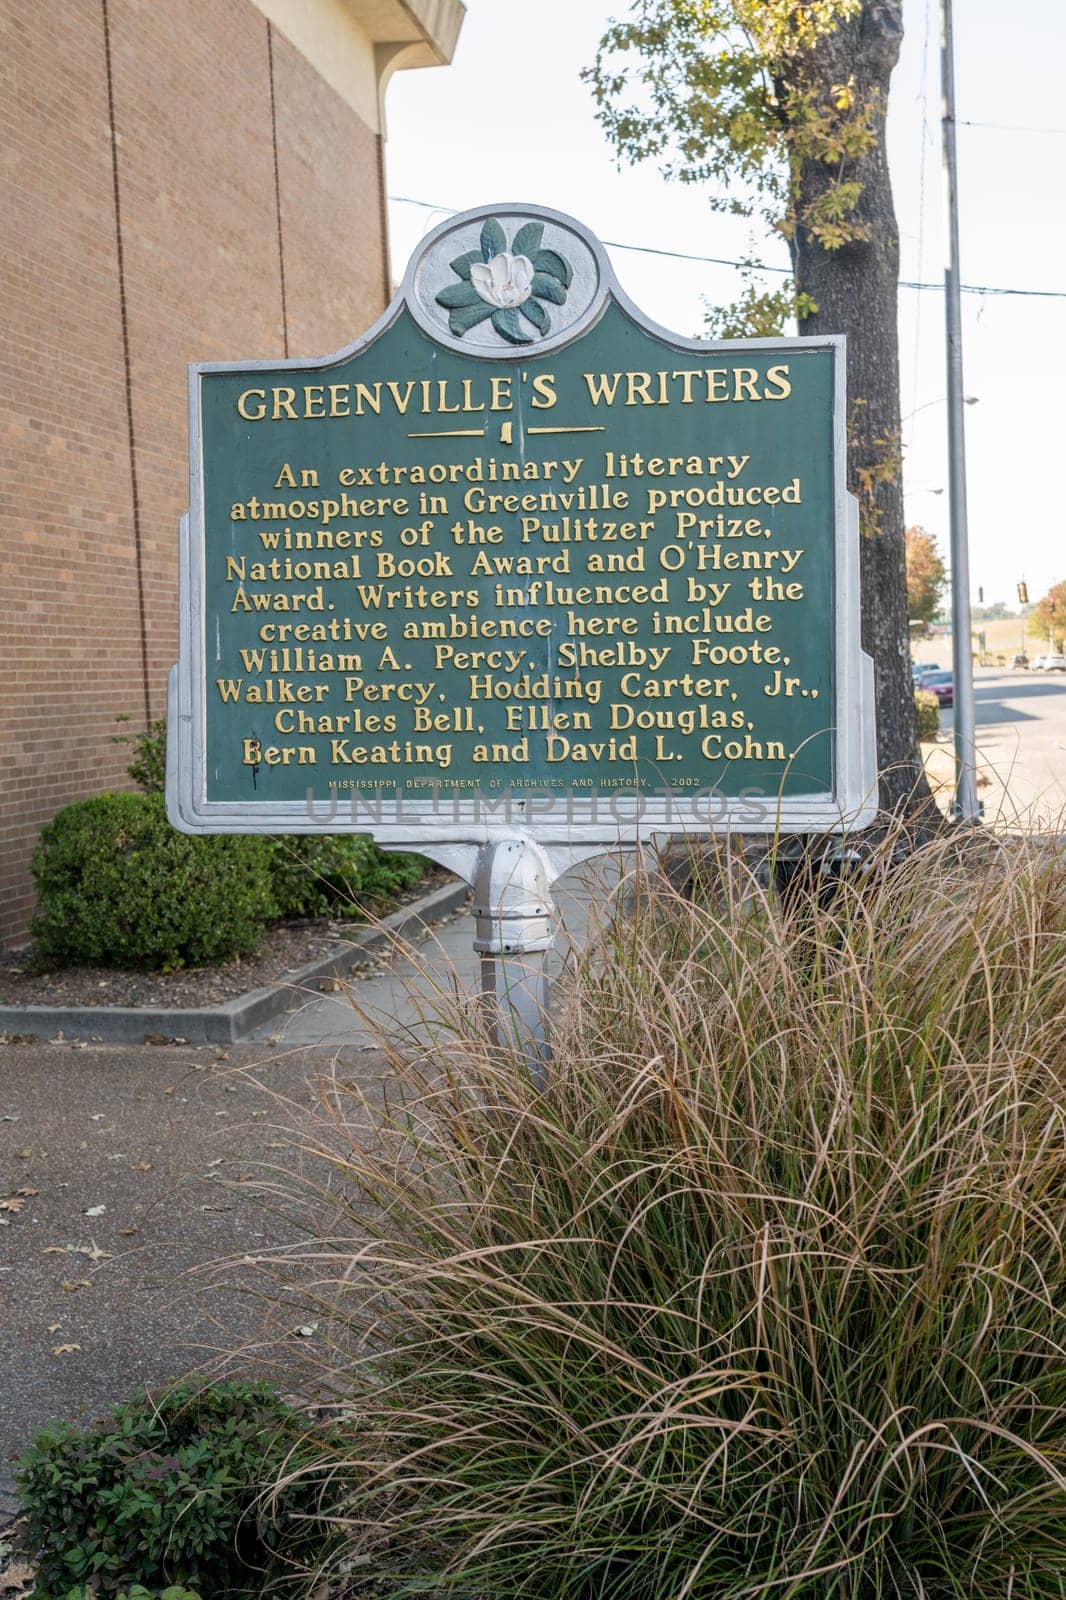 Sign of famous writers in the small town of Greenville, MS by steheap